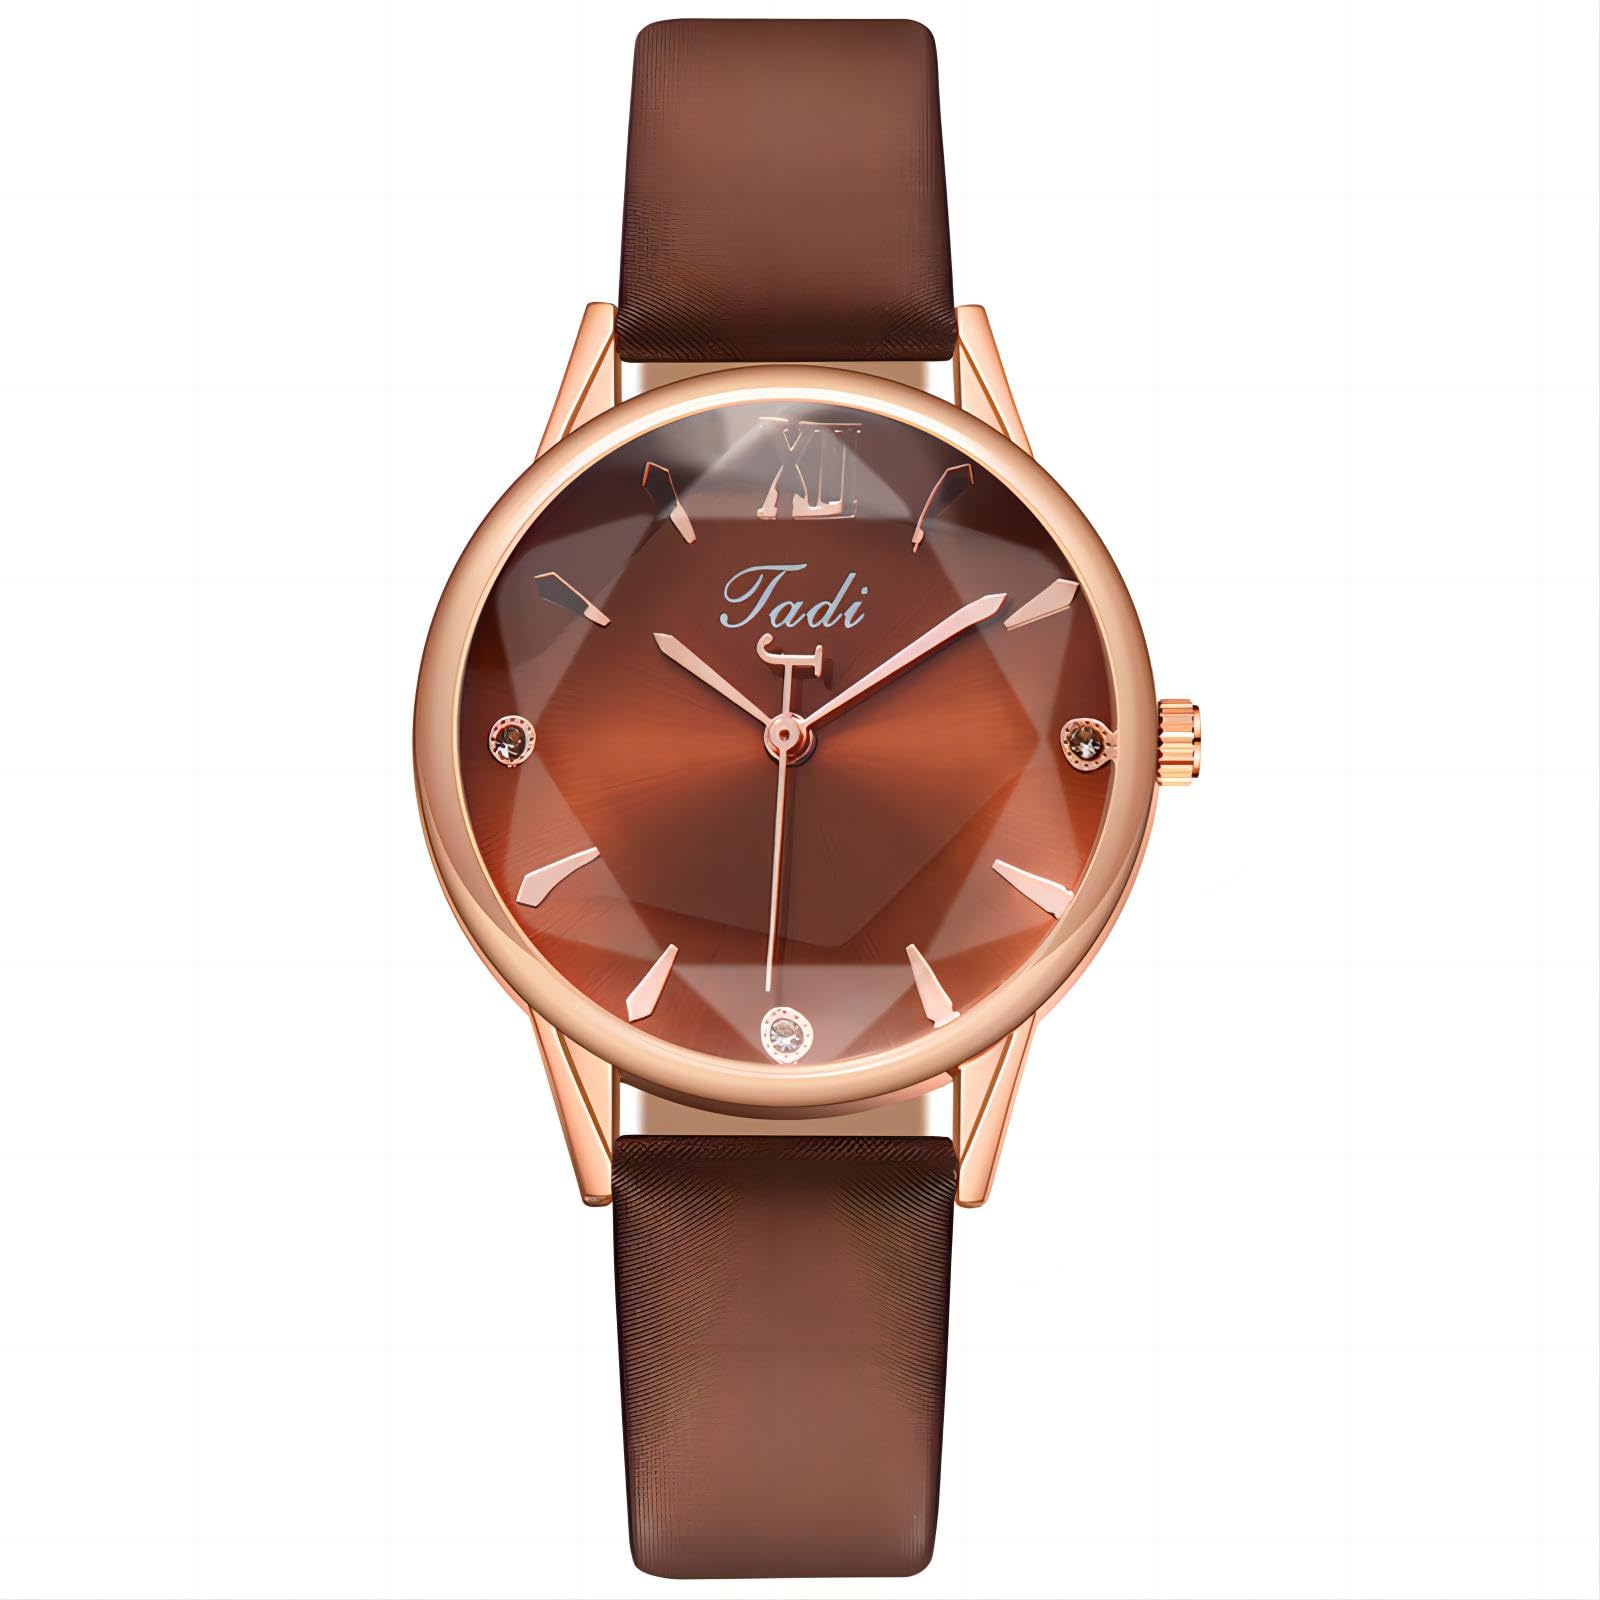 TPSOUM Wrist Watch for Women, Classic Designed Quartz Analog Women's Watch with Breathable Leather Strap